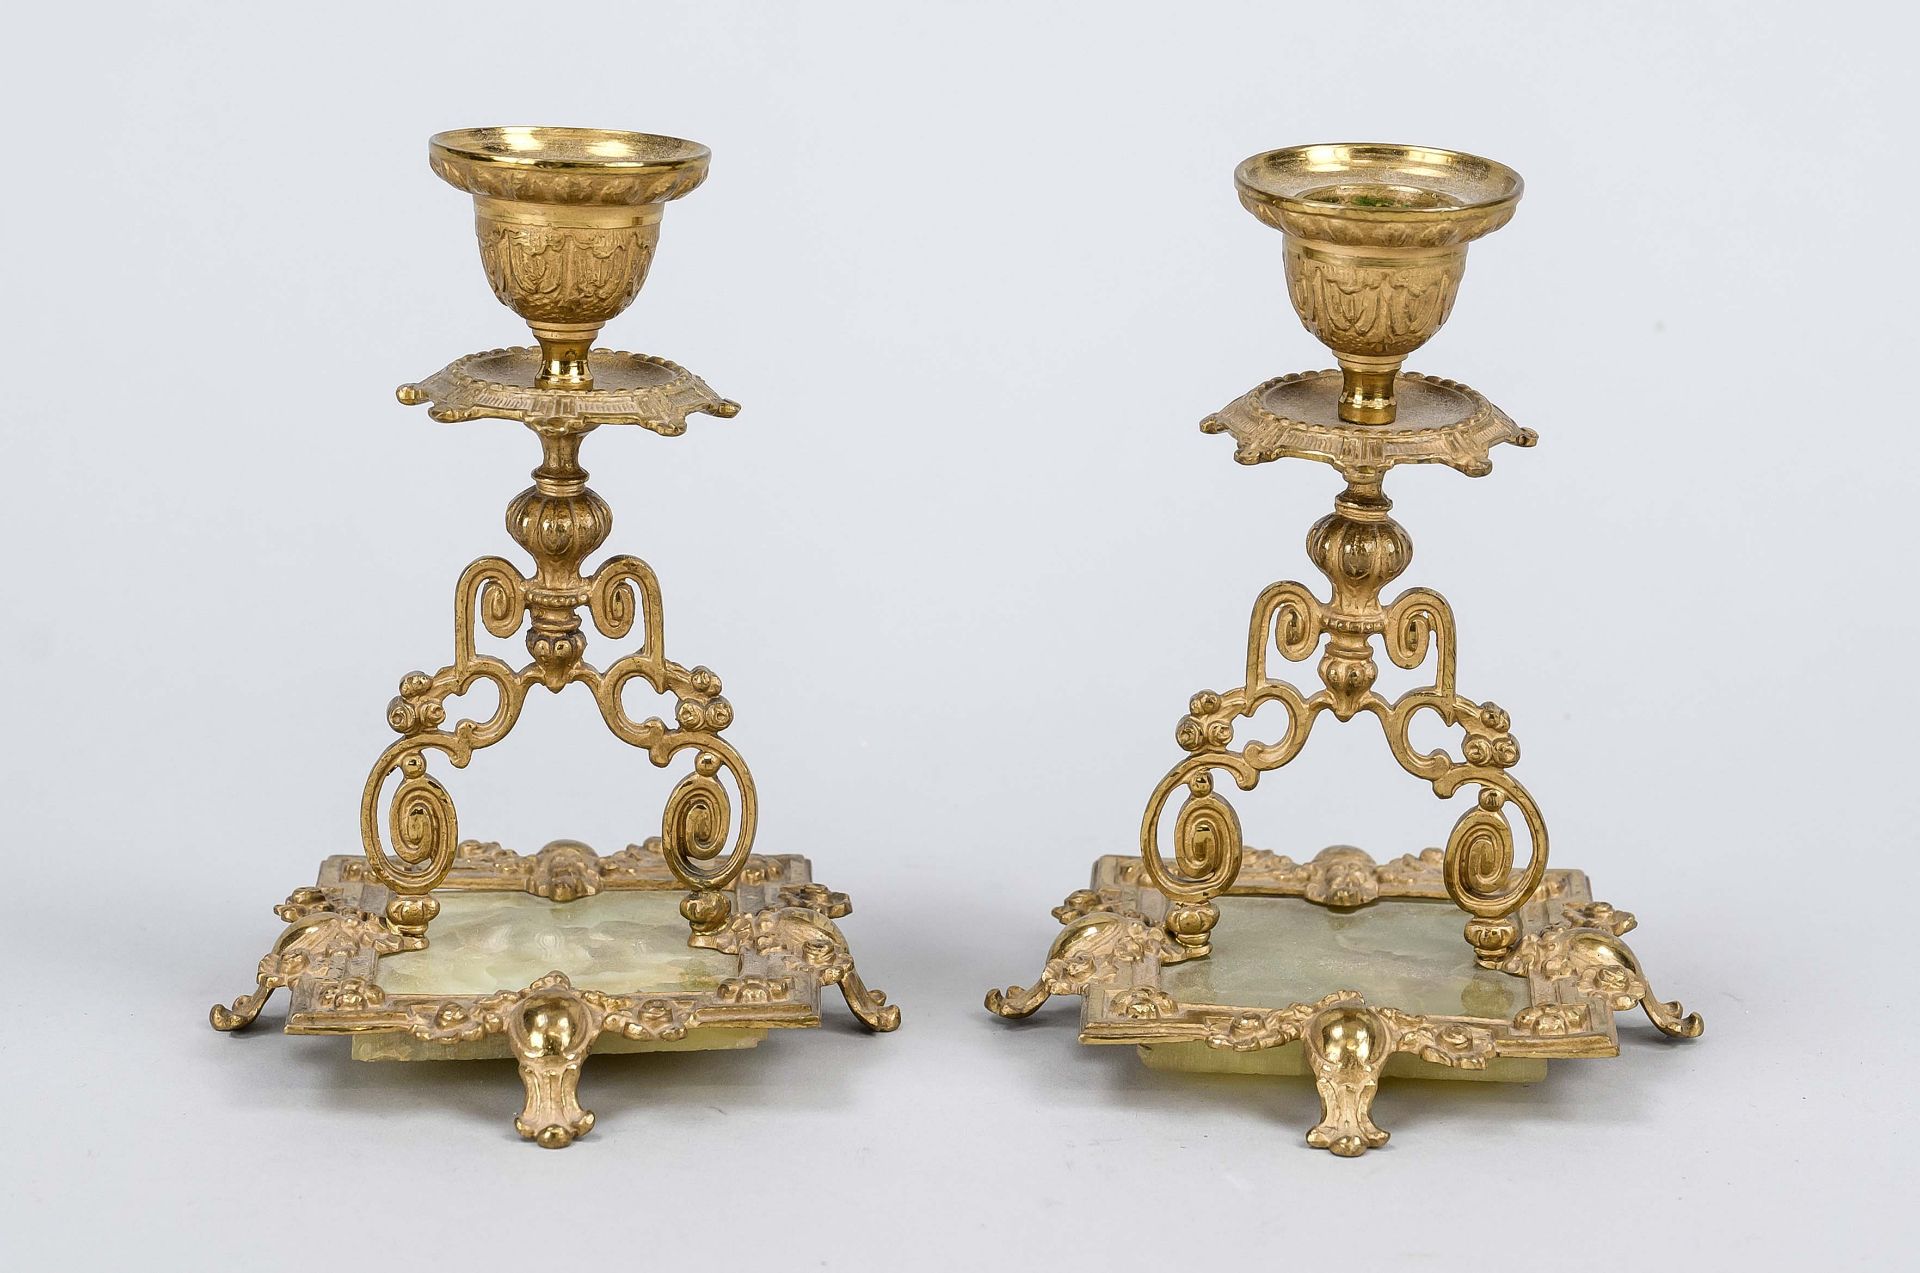 Pair of candlesticks, 19th century, gilded bronze on onyx plate, h. 13 cm